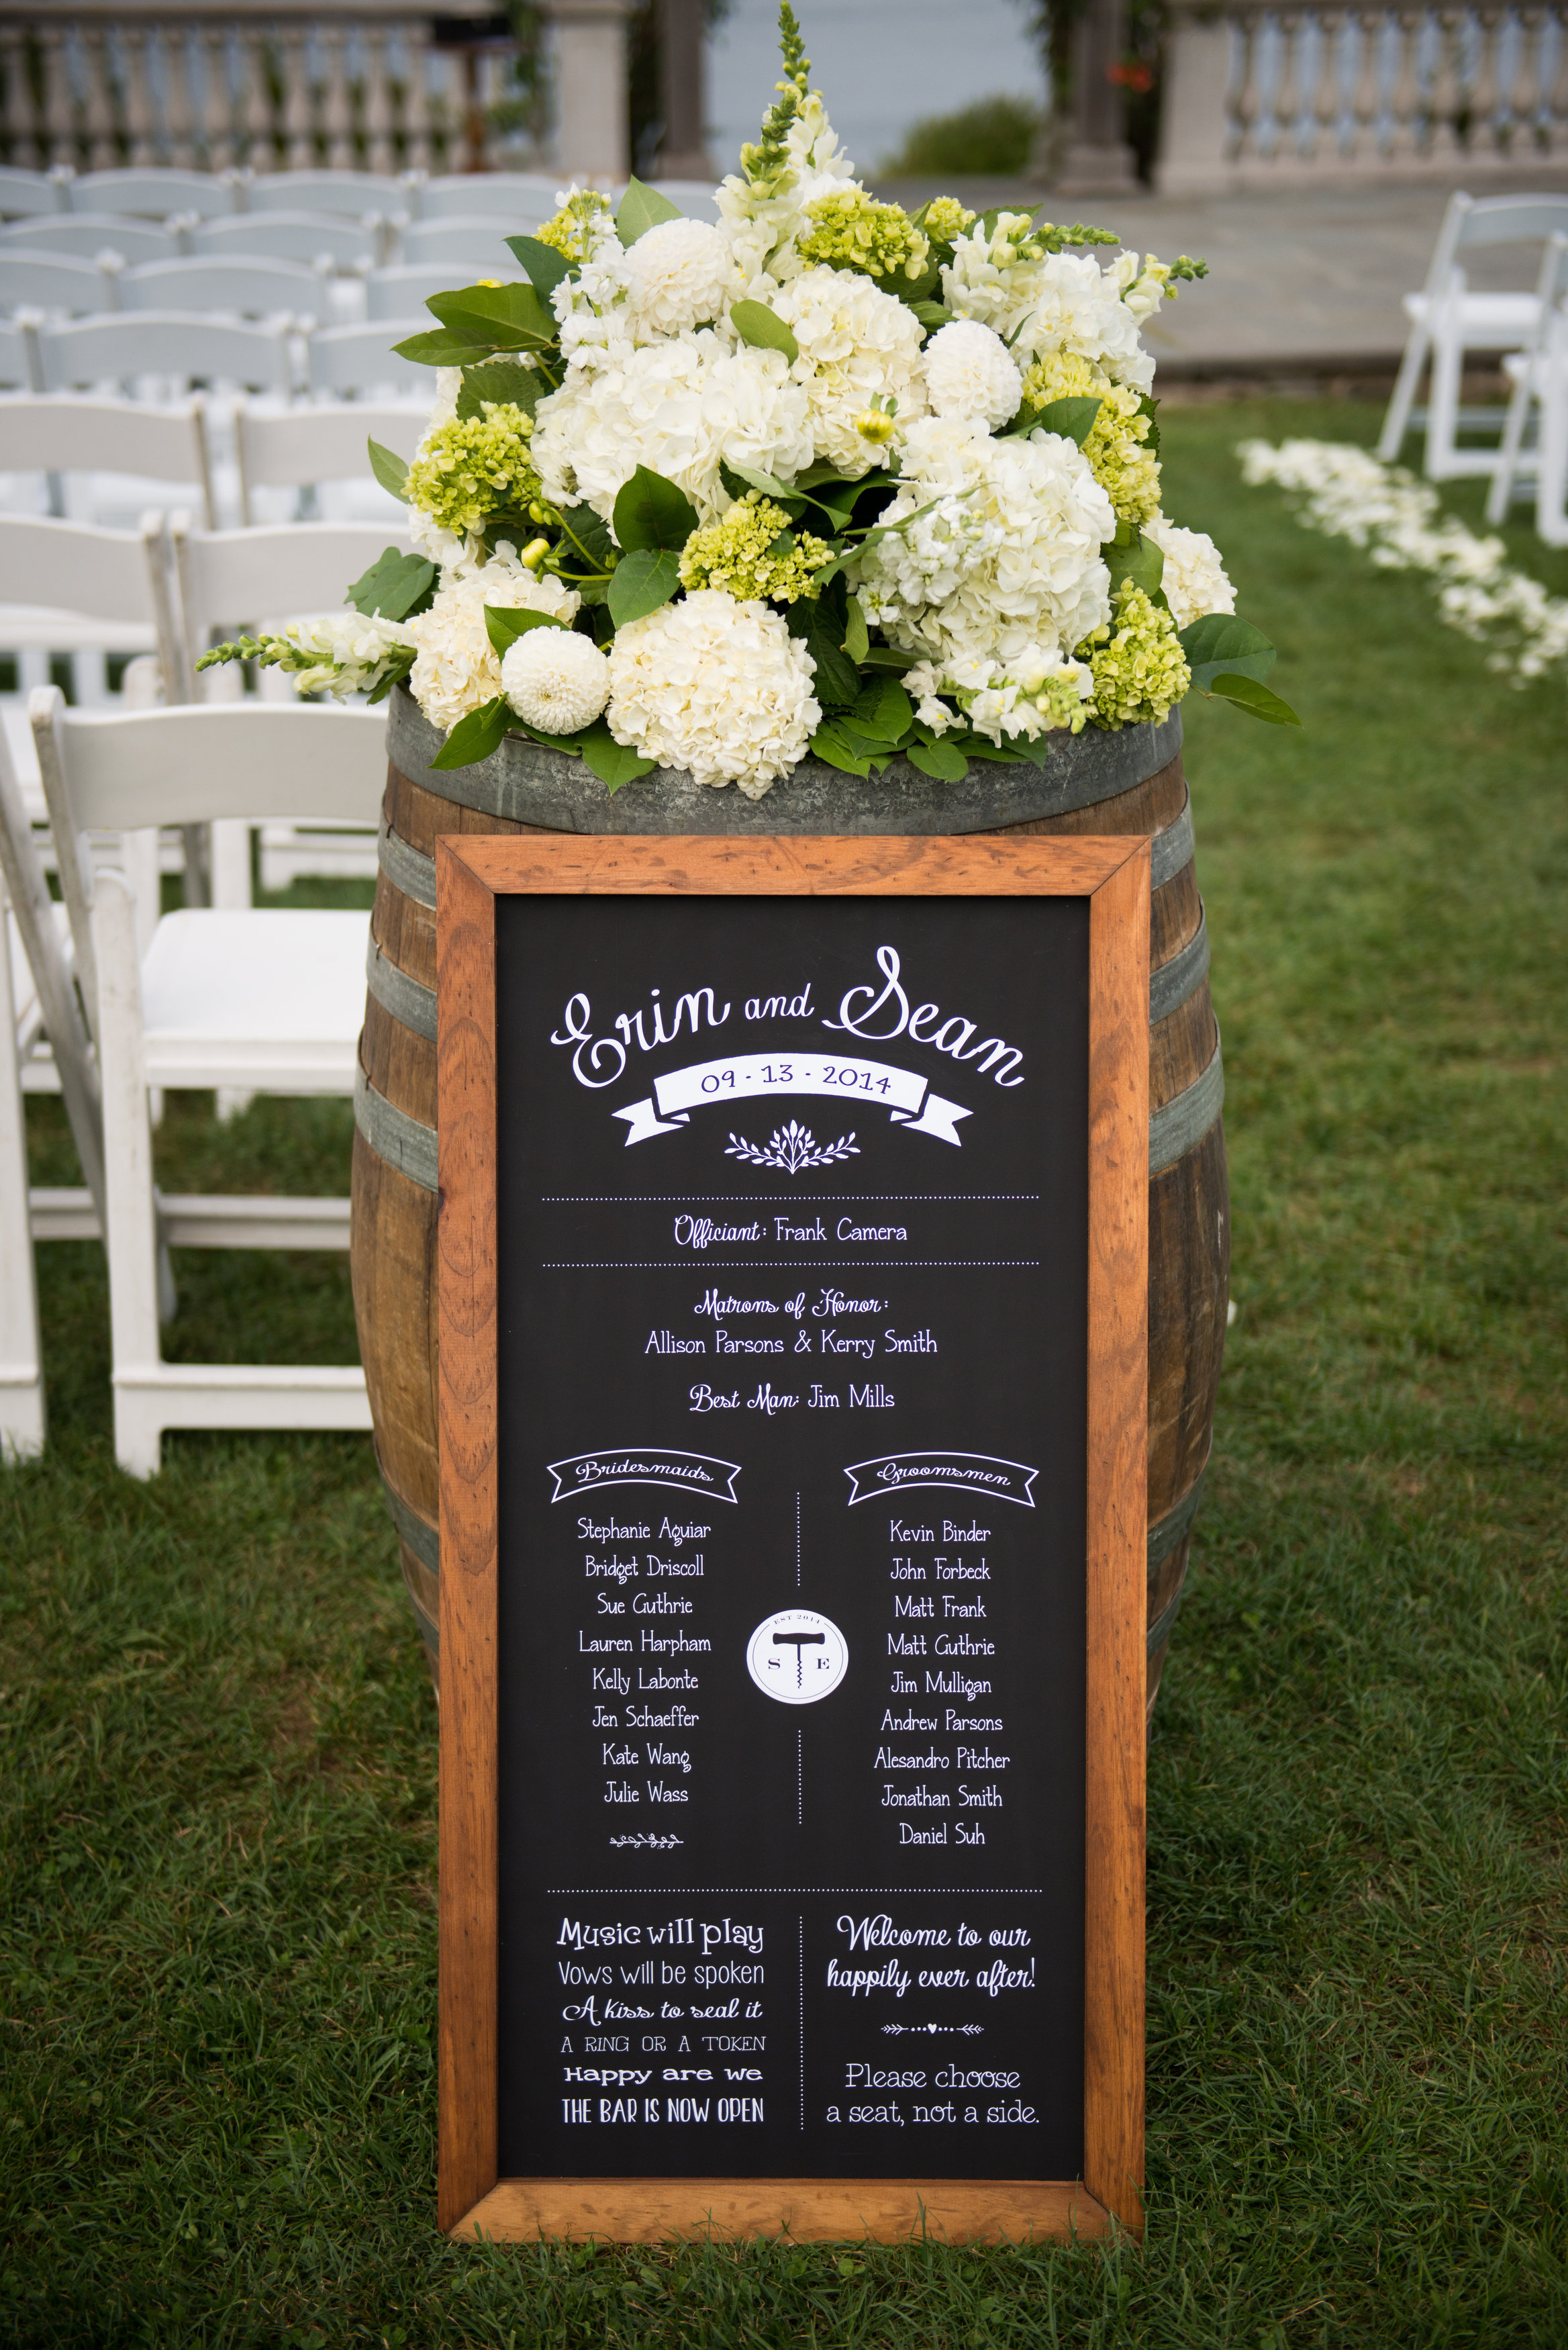 View More: http://snapweddings.pass.us/guthrie-carmickle-wedding